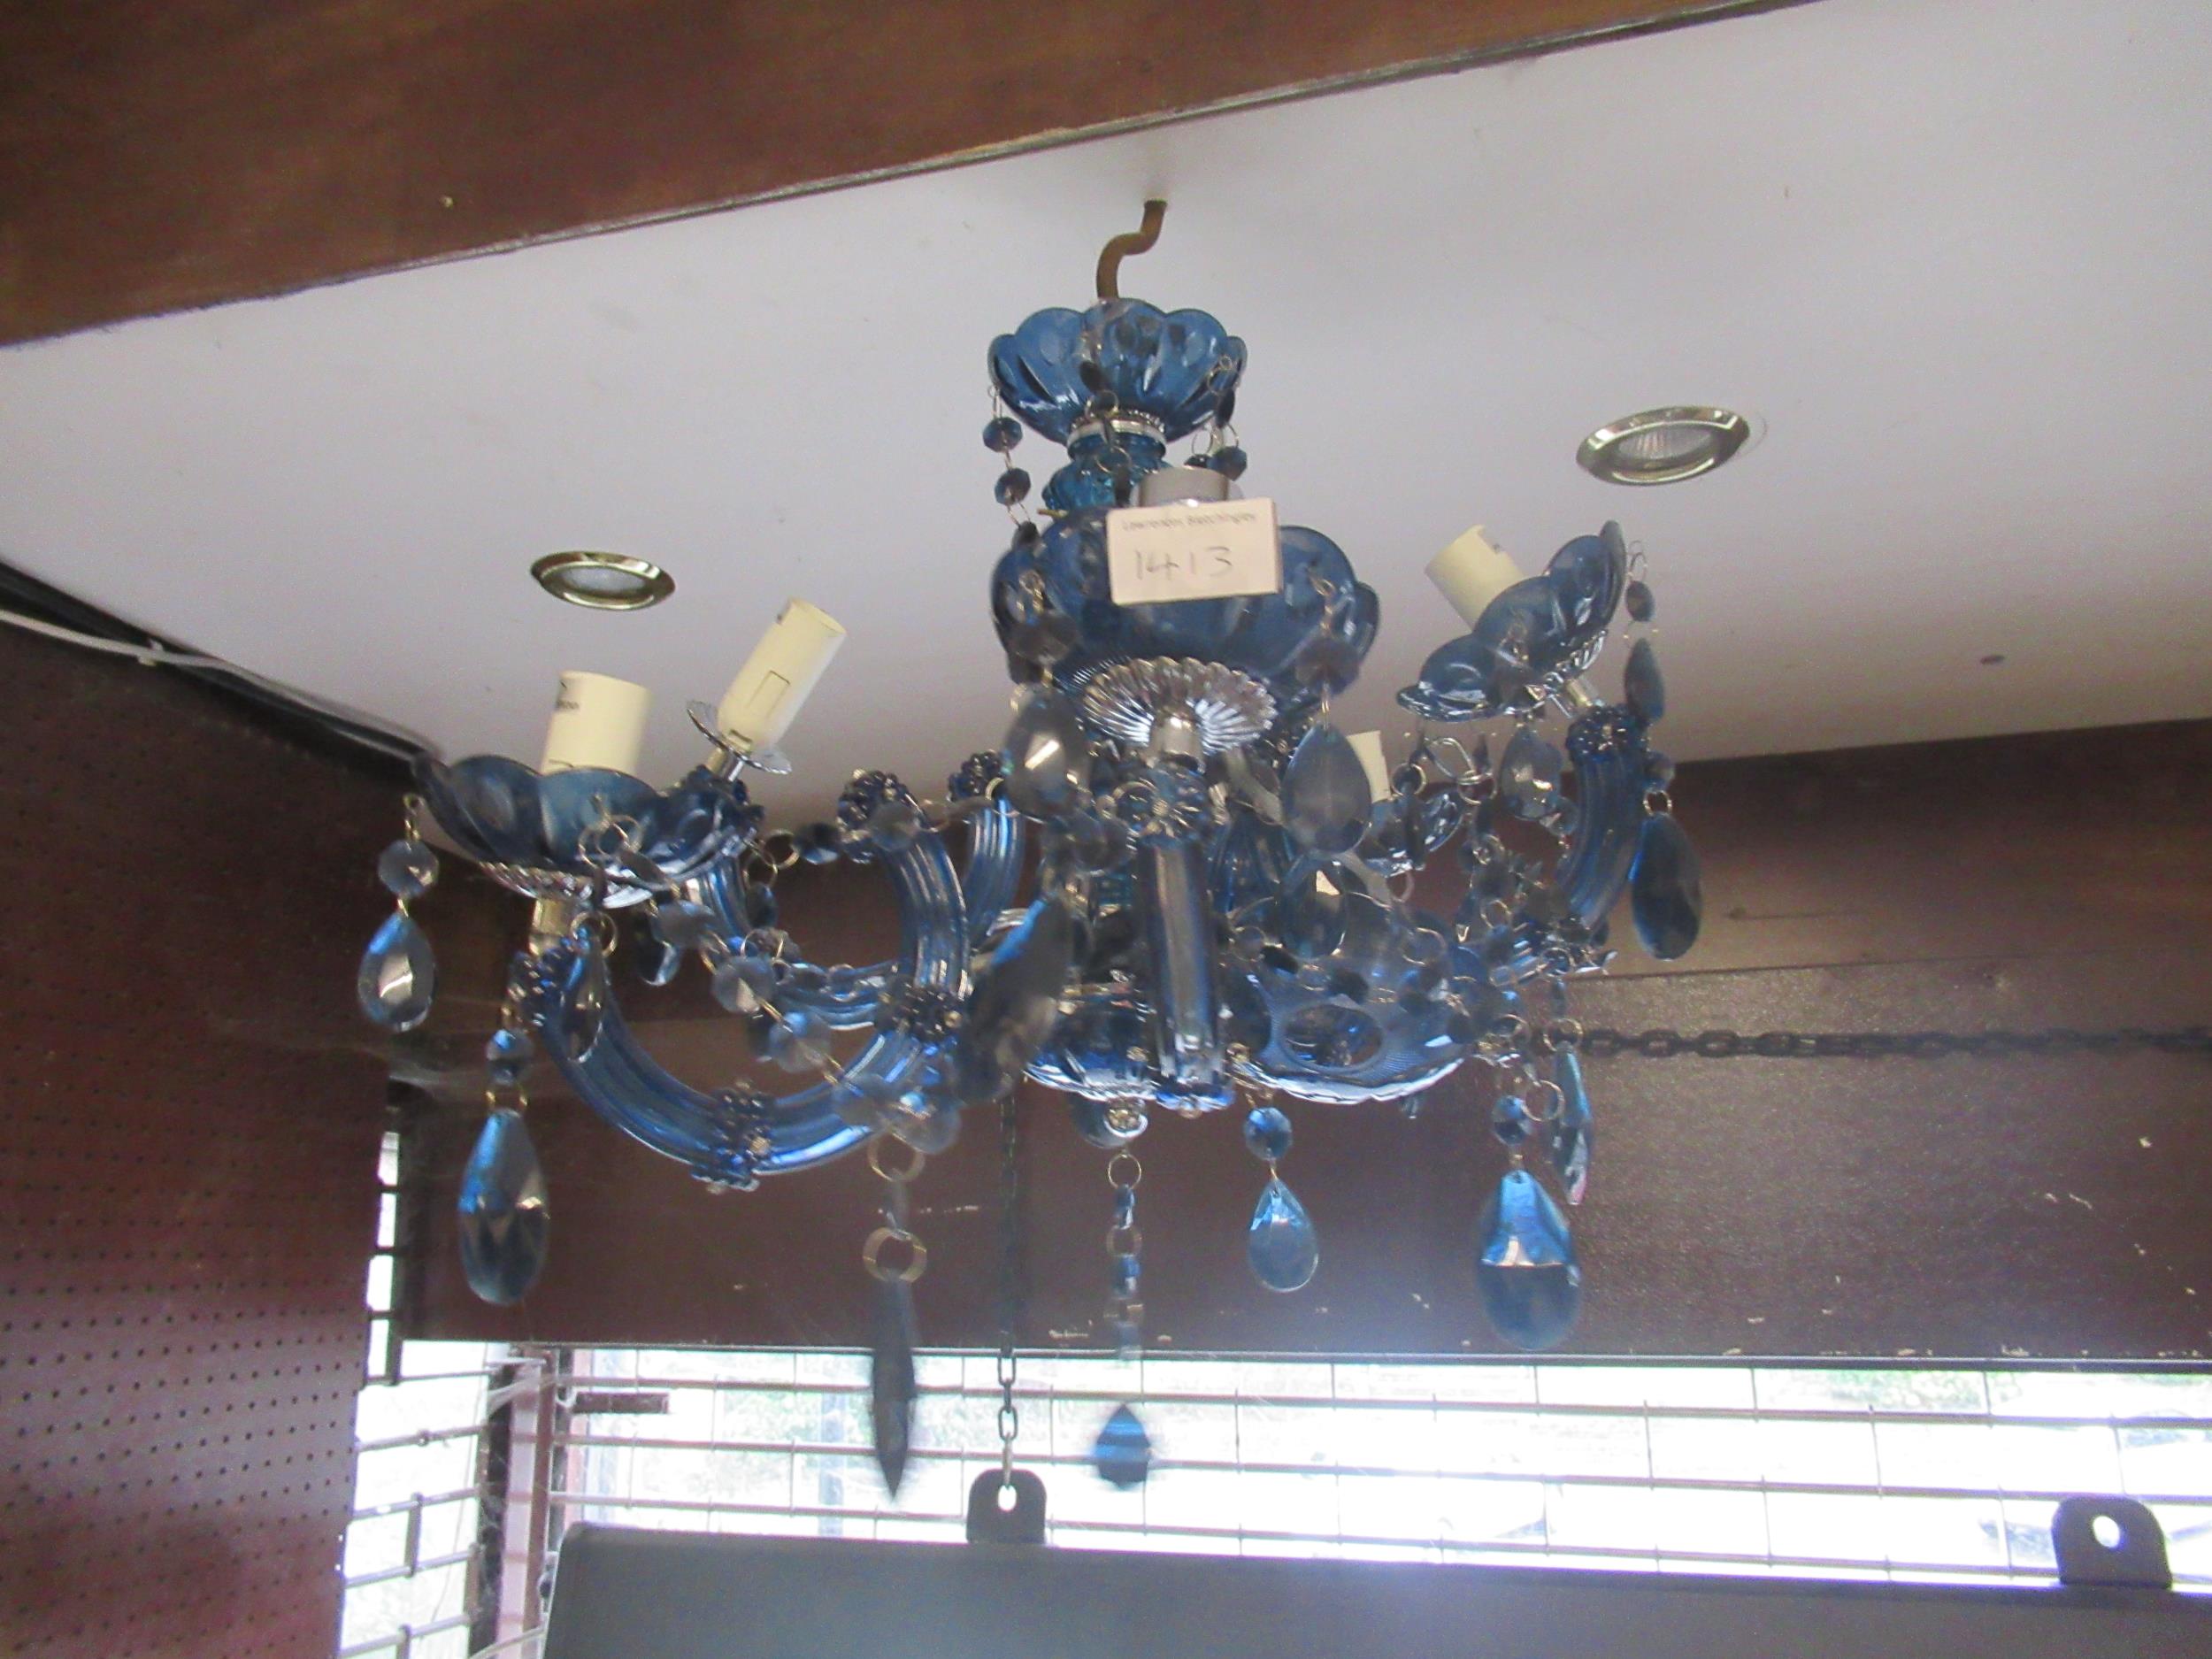 Two modern Venetian style chandeliers, one with clear glass arms, the other with blue glass arms - Image 2 of 3